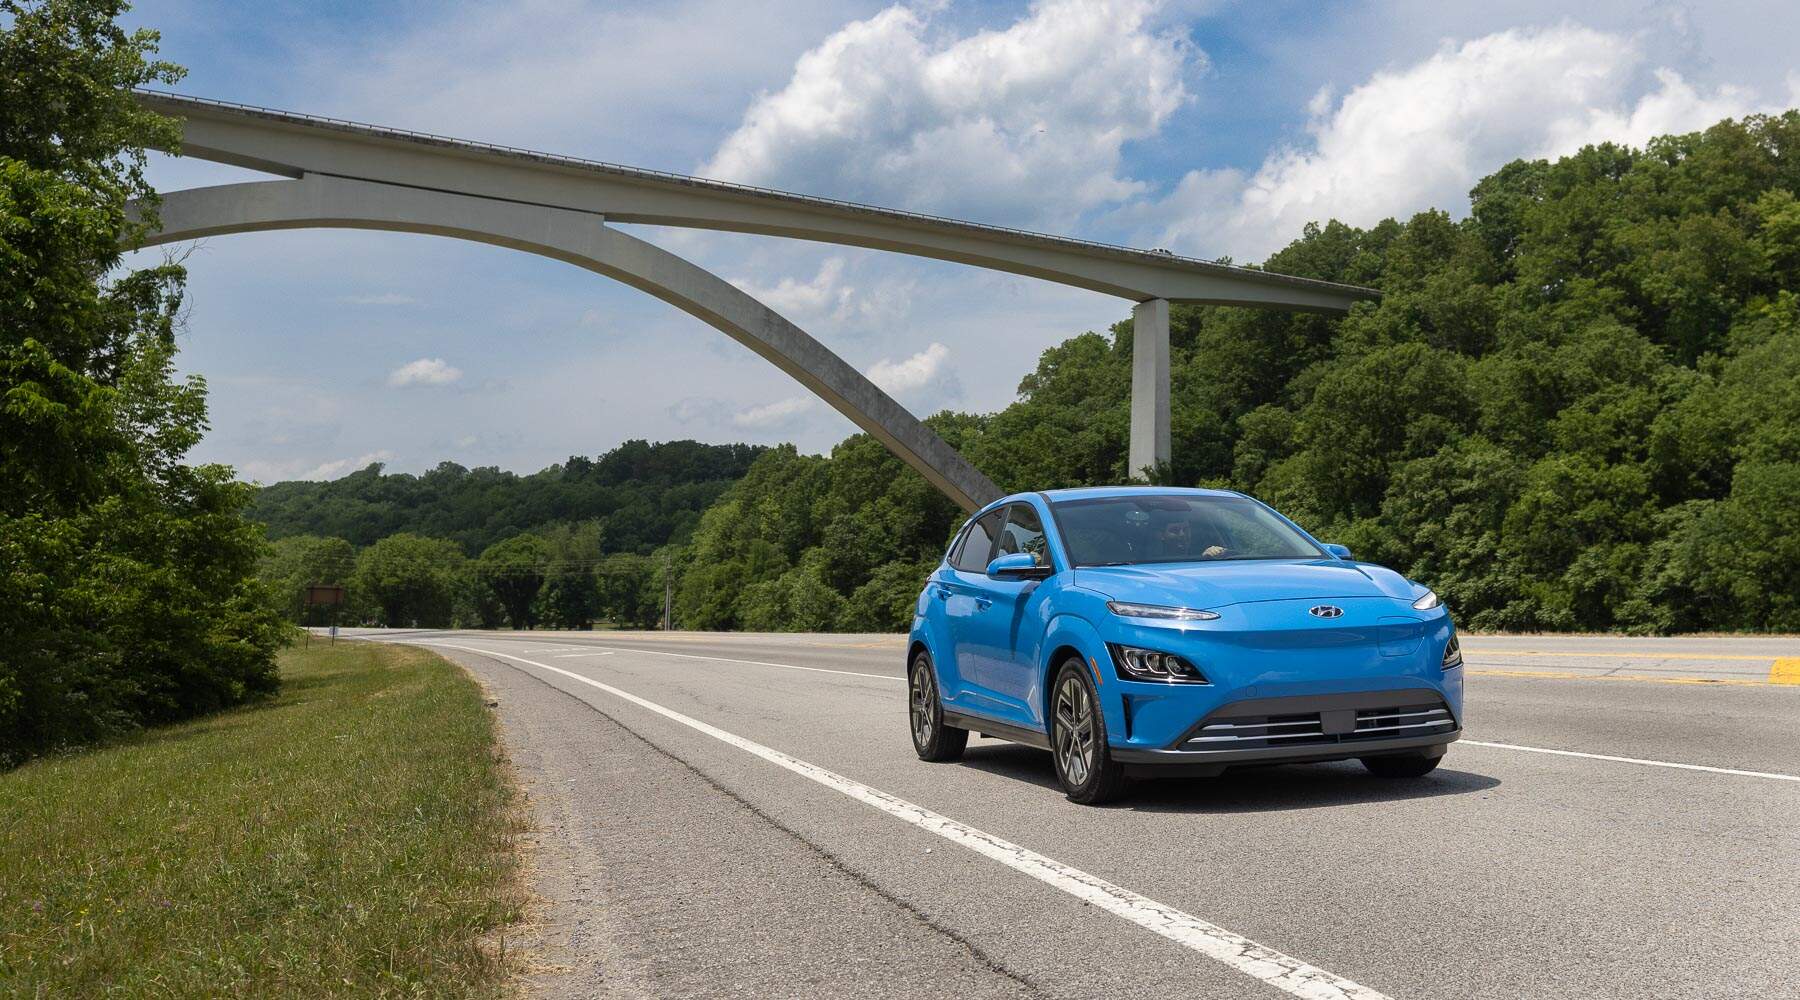 At Metro West Hyundai in Framingham, MA, you can find the perfect electric or hybrid car for your eco-friendly lifestyle. A wide range of vehicles is available, from the Kona Electric to the IONIQ Electric and Plug-in Hybrid. Stop by today and discover the perfect car for you!